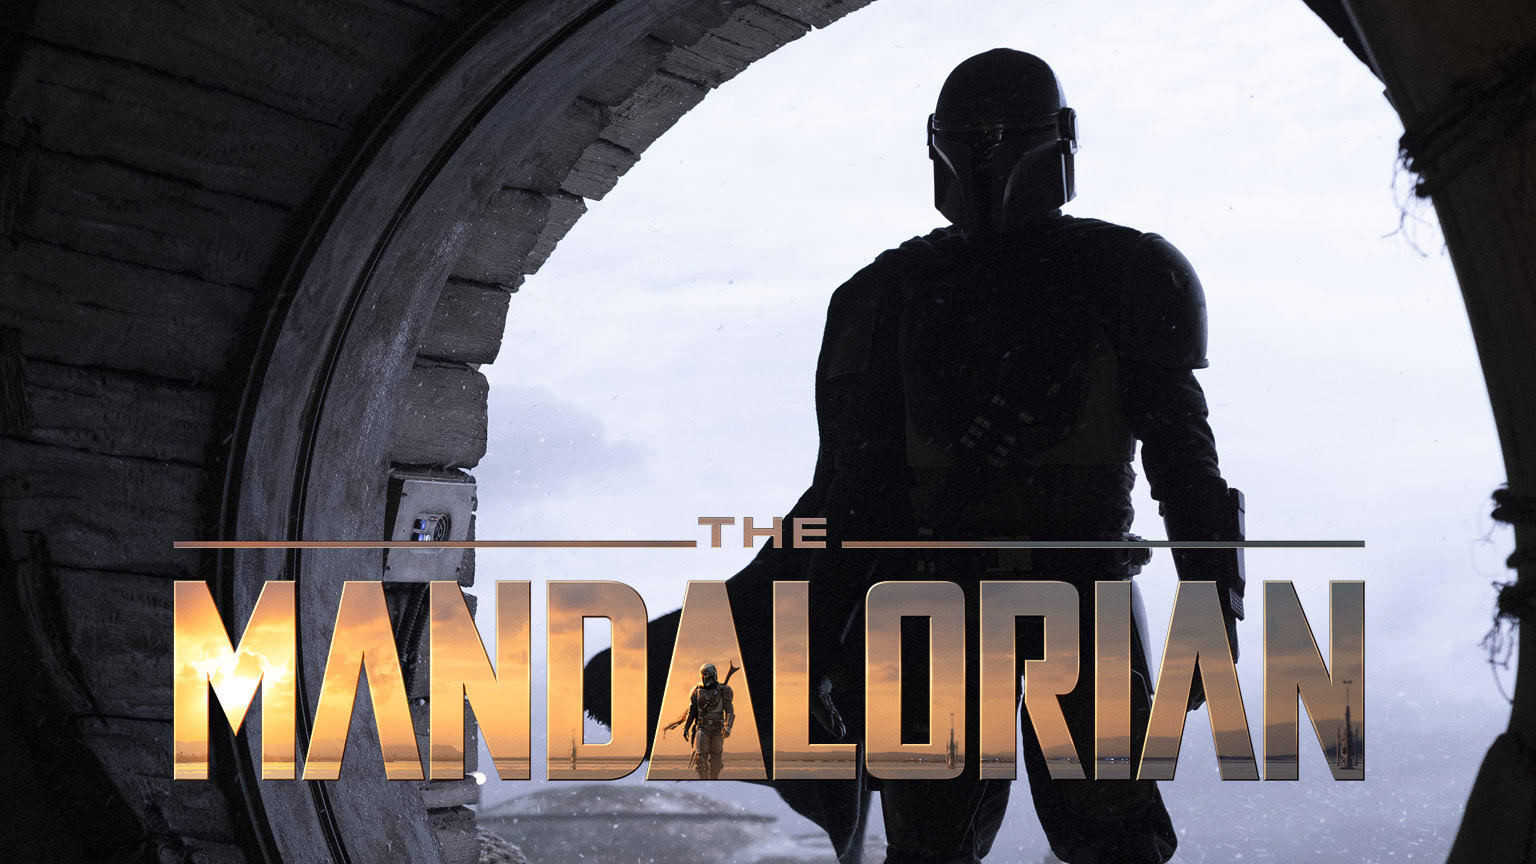 Disney+ Star Wars Series “The Mandalorian” Reported to Cost $15 Million Per Episode